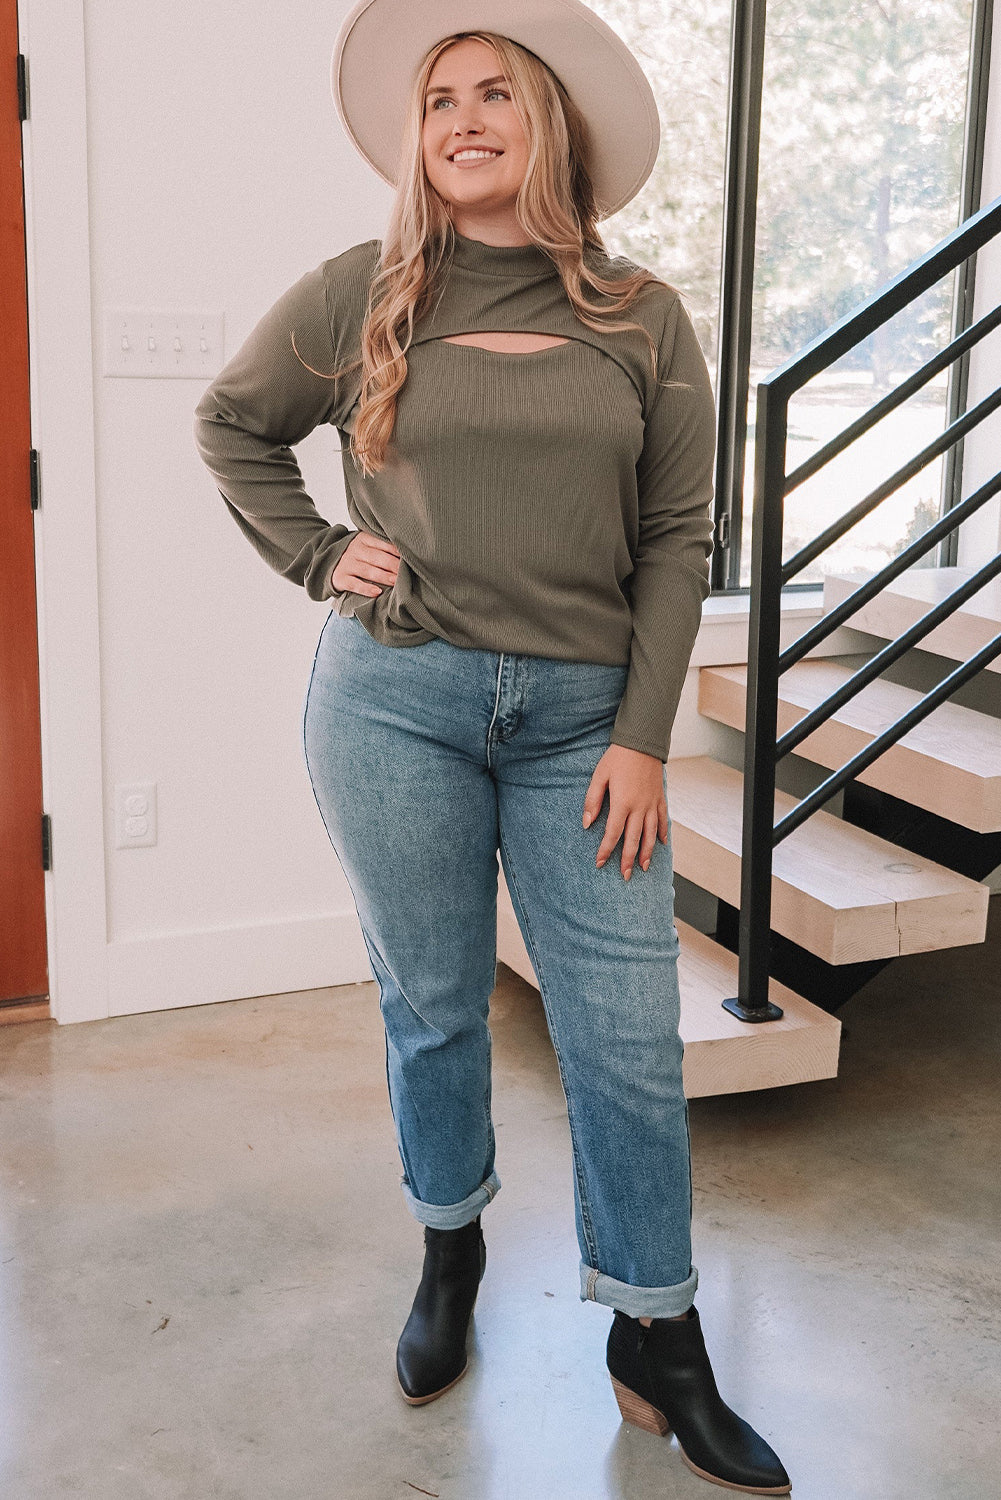 Plus Size Ribbed Mock Neck Peek-A-Boo Cut Out Top